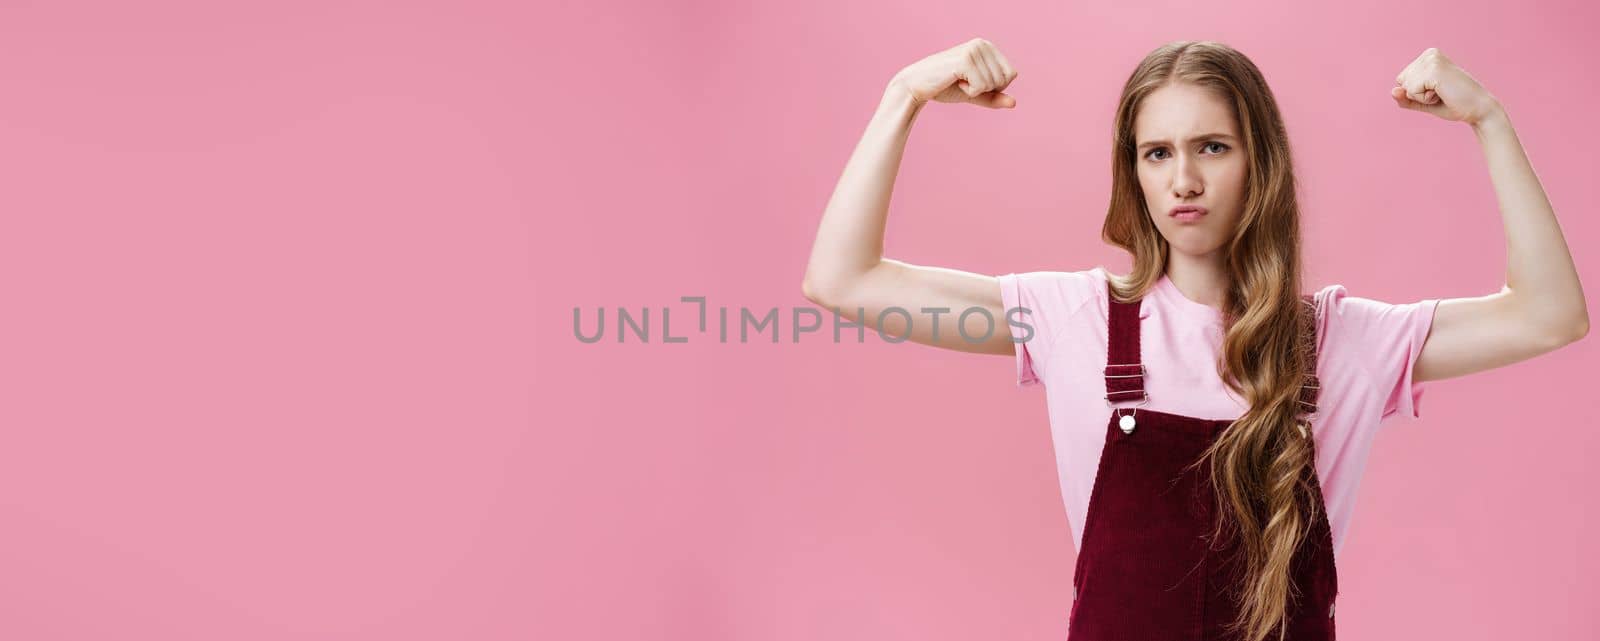 Girl shows she strong and independent. Serious-looking confident slender female raising hands to show muscles feeling self-assured in own power and female strengths posing against pink wall. Copy space